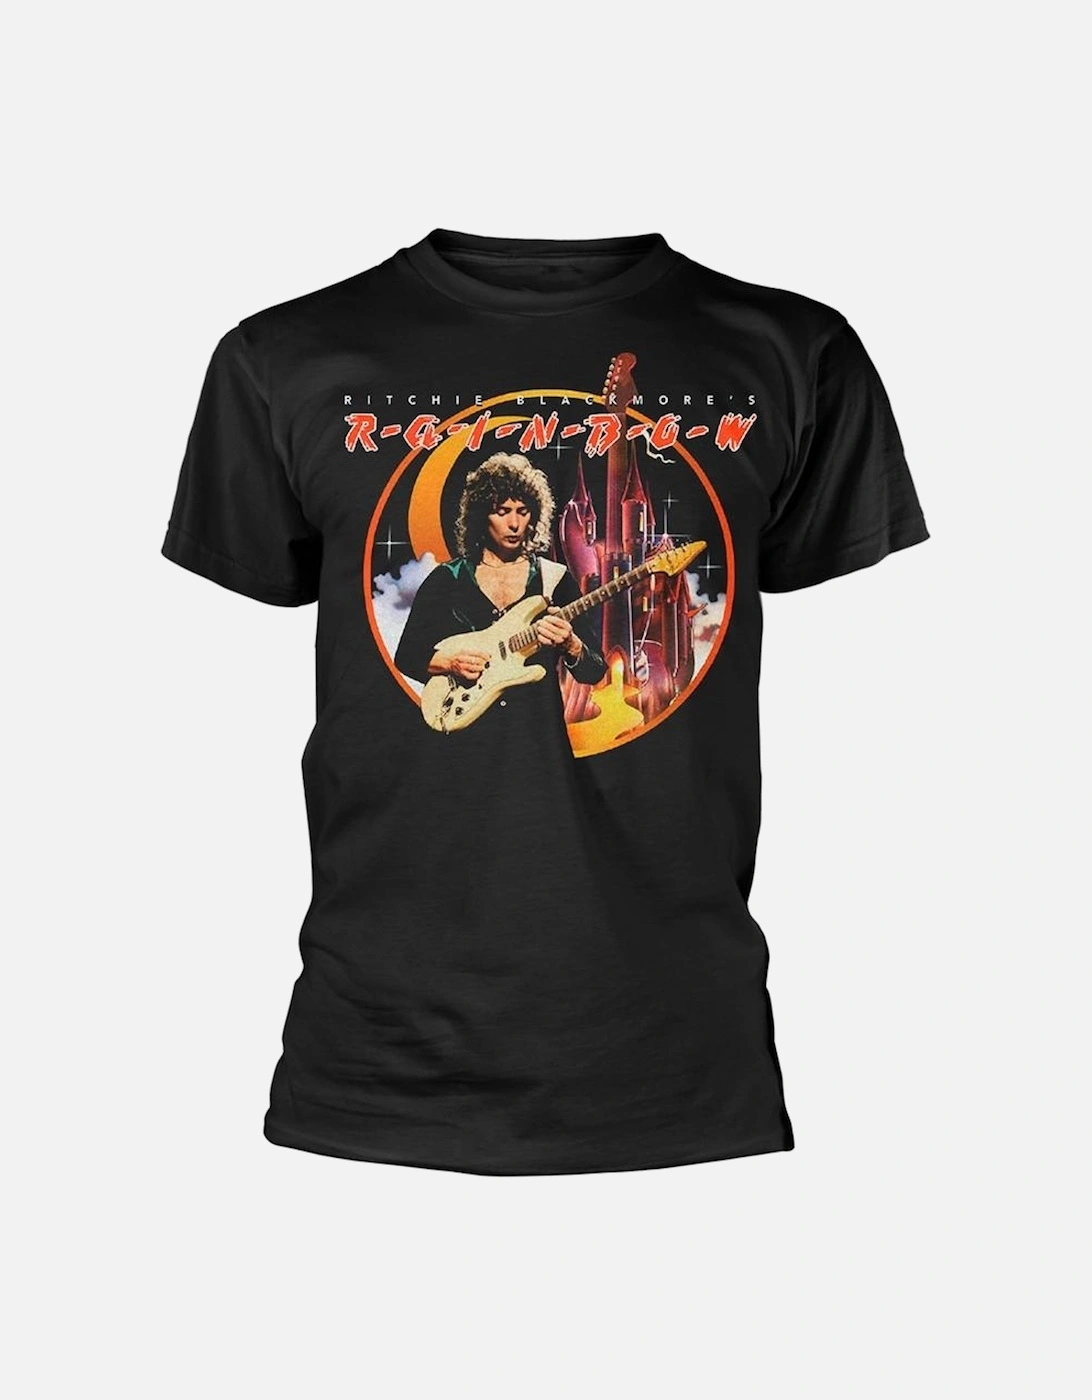 Unisex Adult Ritchie Blackmore?'s Photograph T-Shirt, 2 of 1